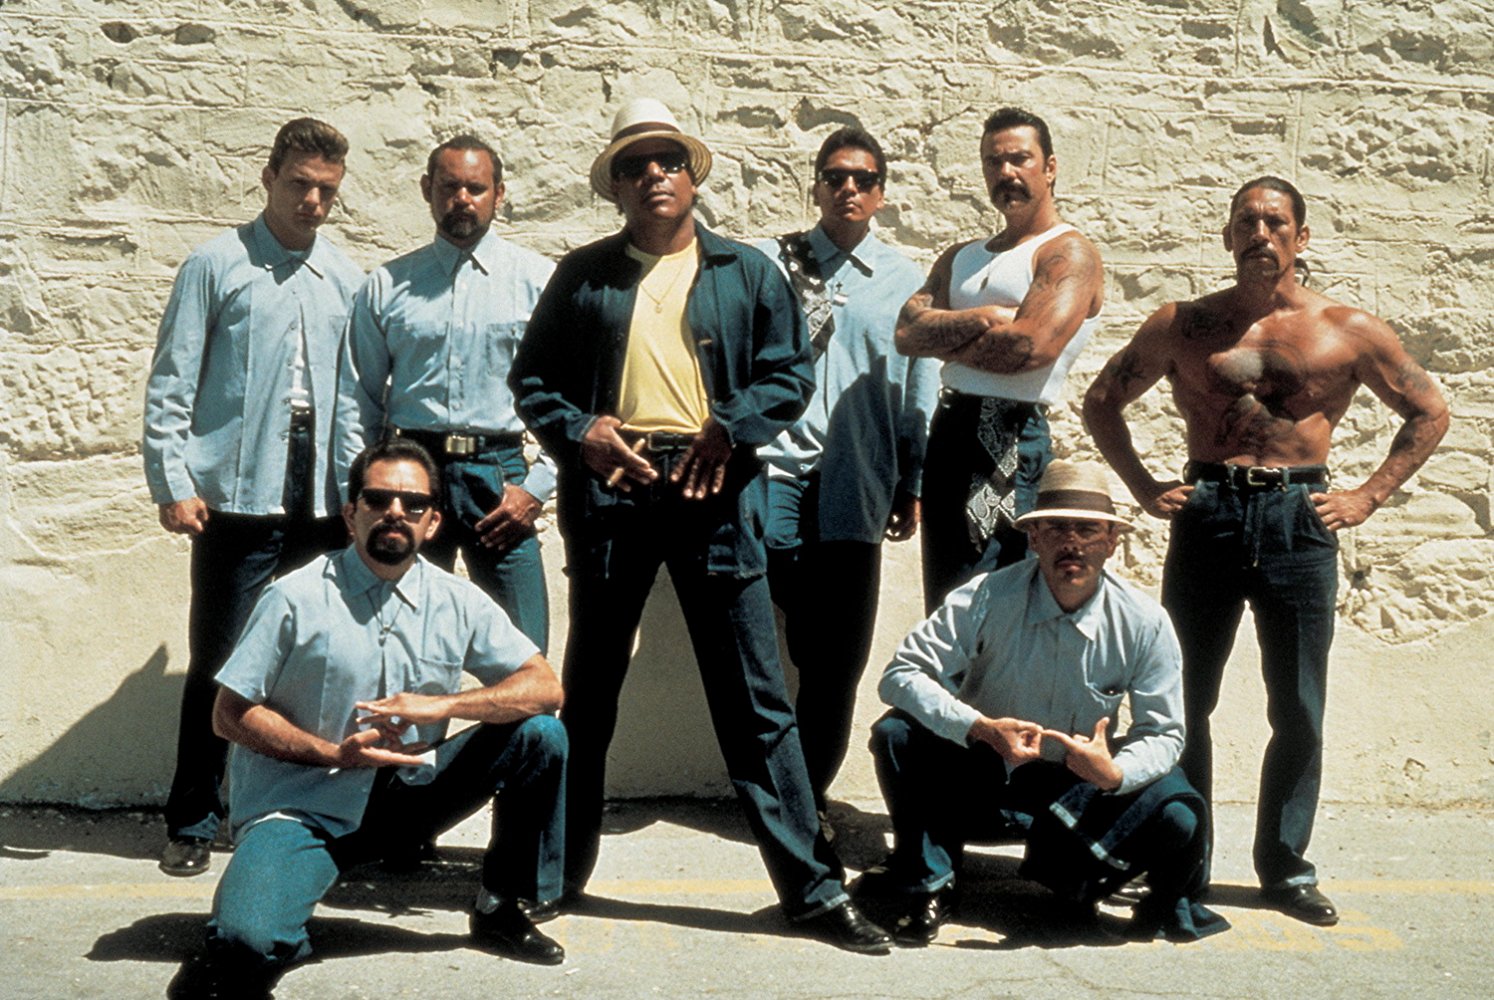 Jesse Borrego on 30th anniversary of 'Blood In, Blood Out